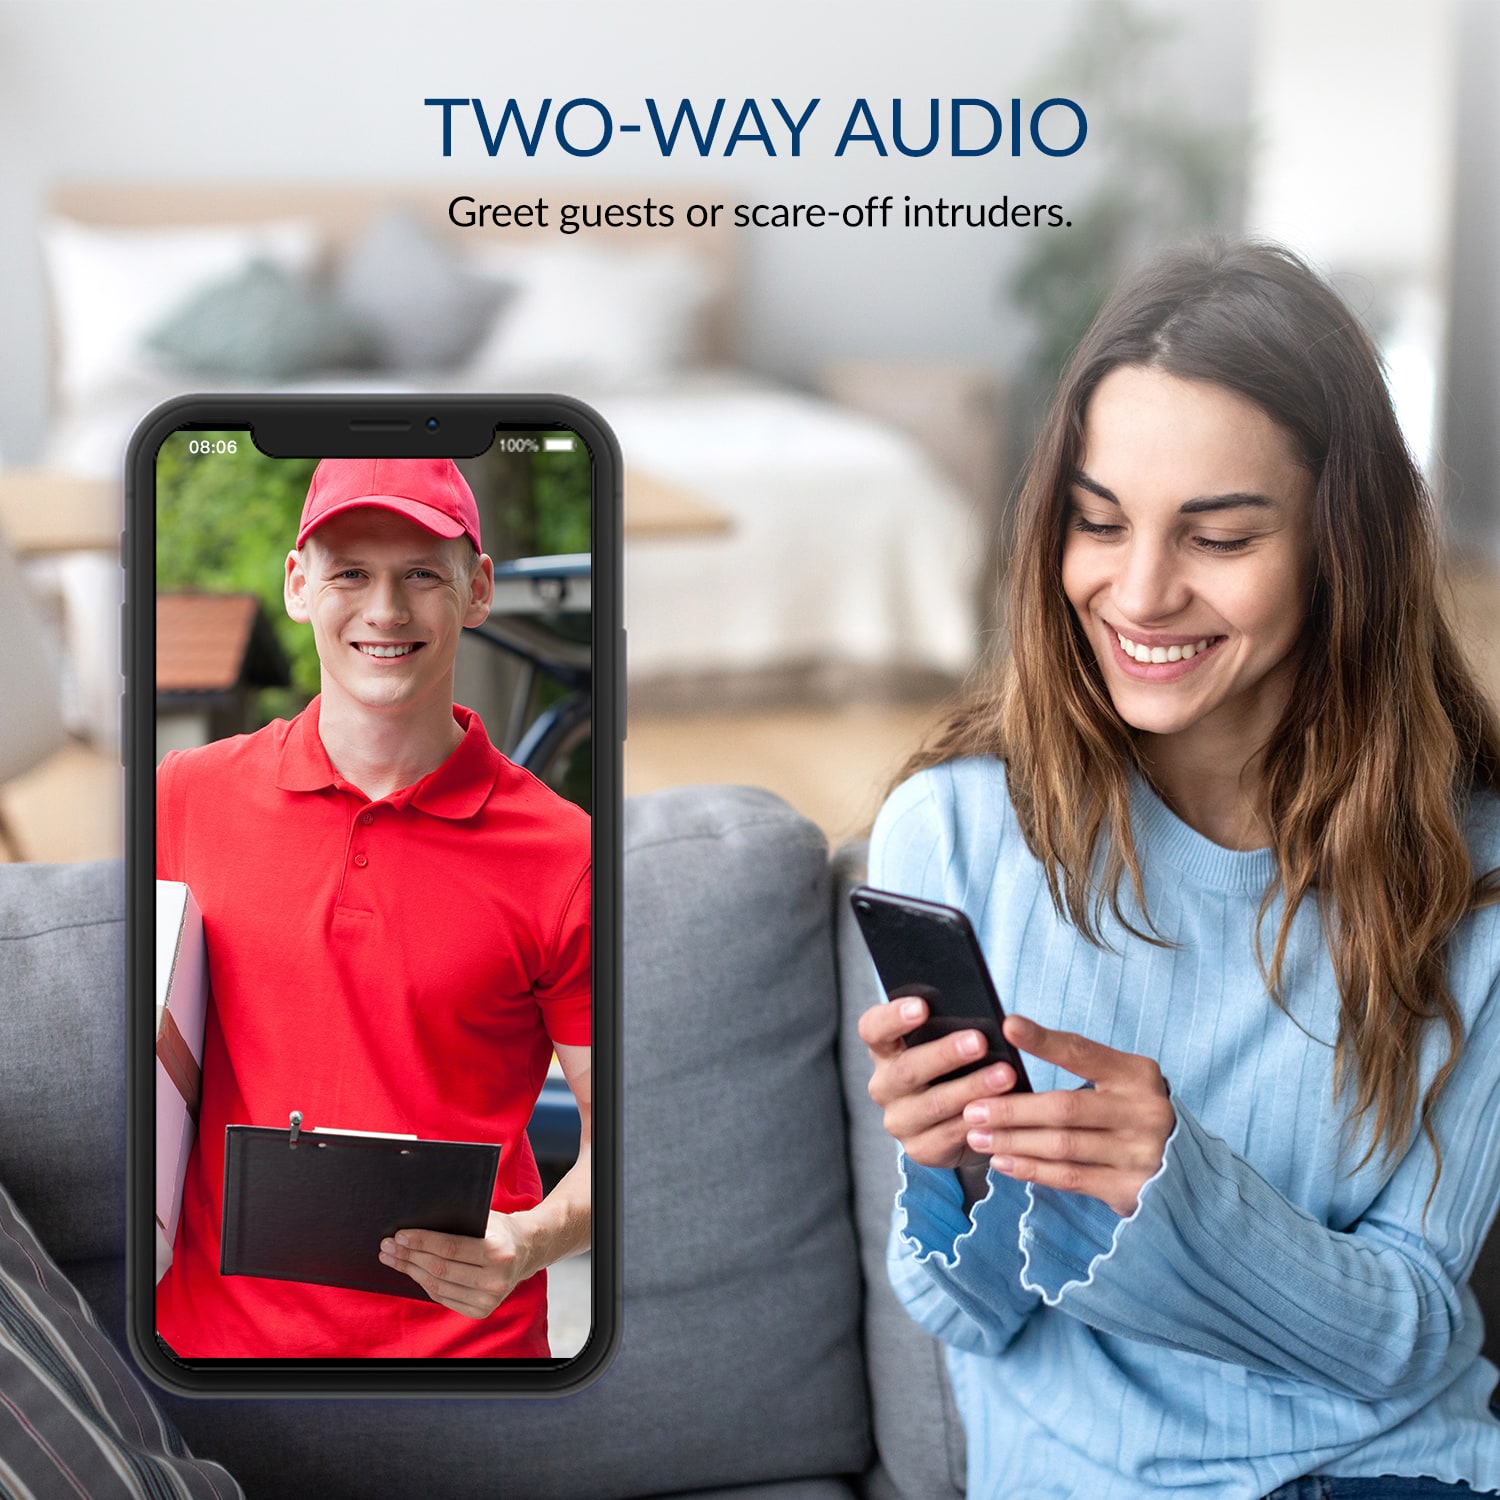 Two-way Audio - Greet guests or scare-off intruders